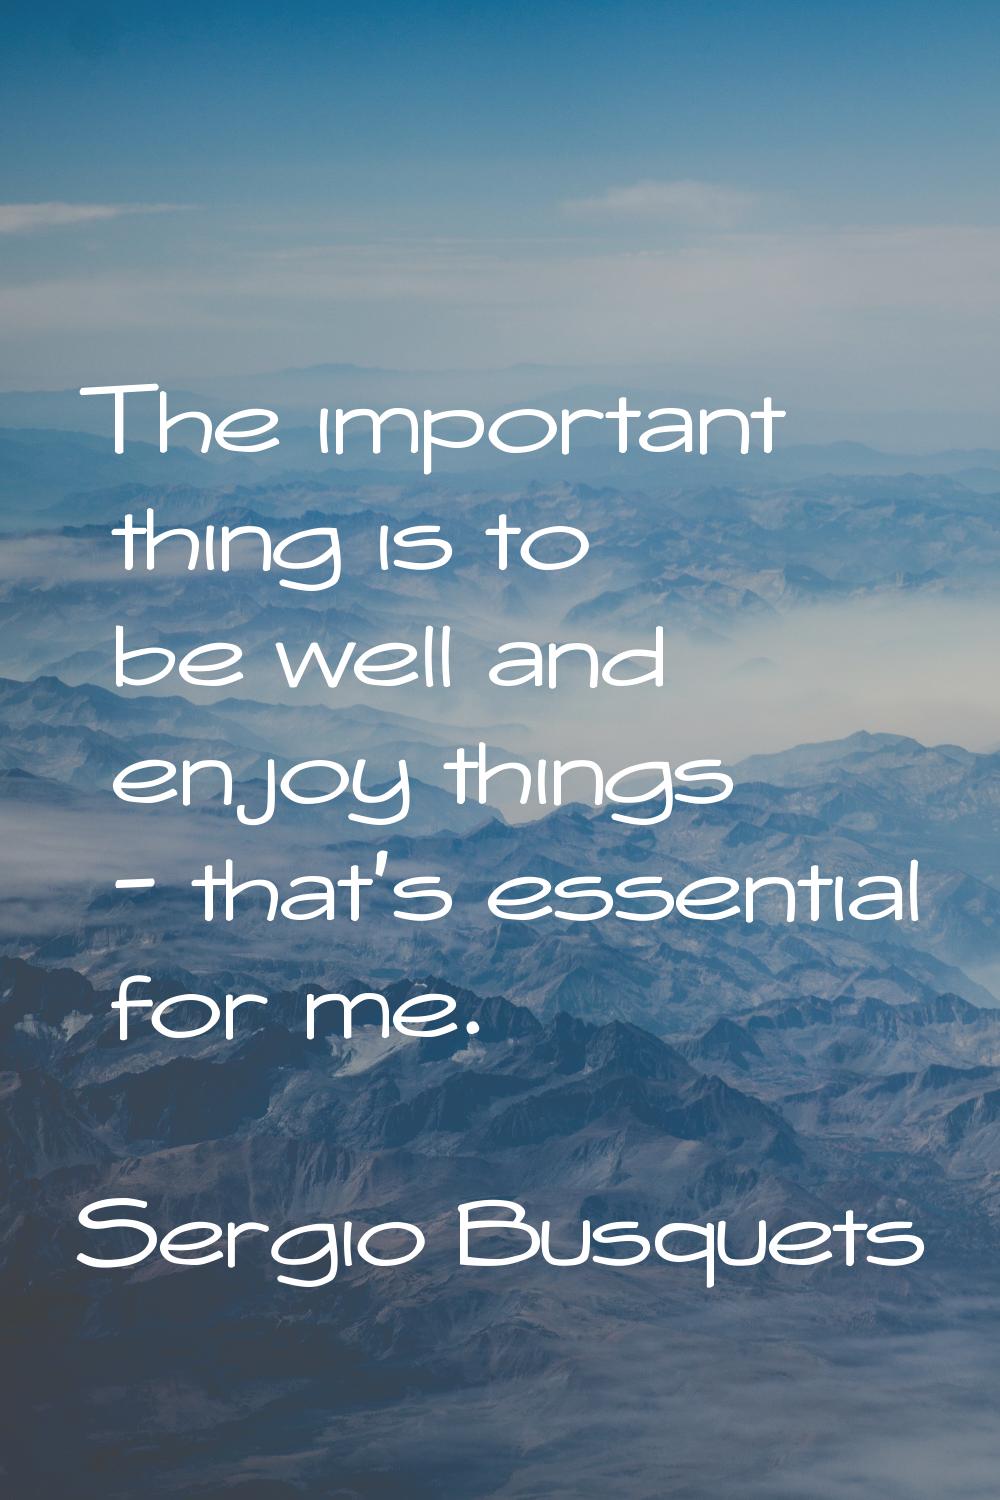 The important thing is to be well and enjoy things - that's essential for me.